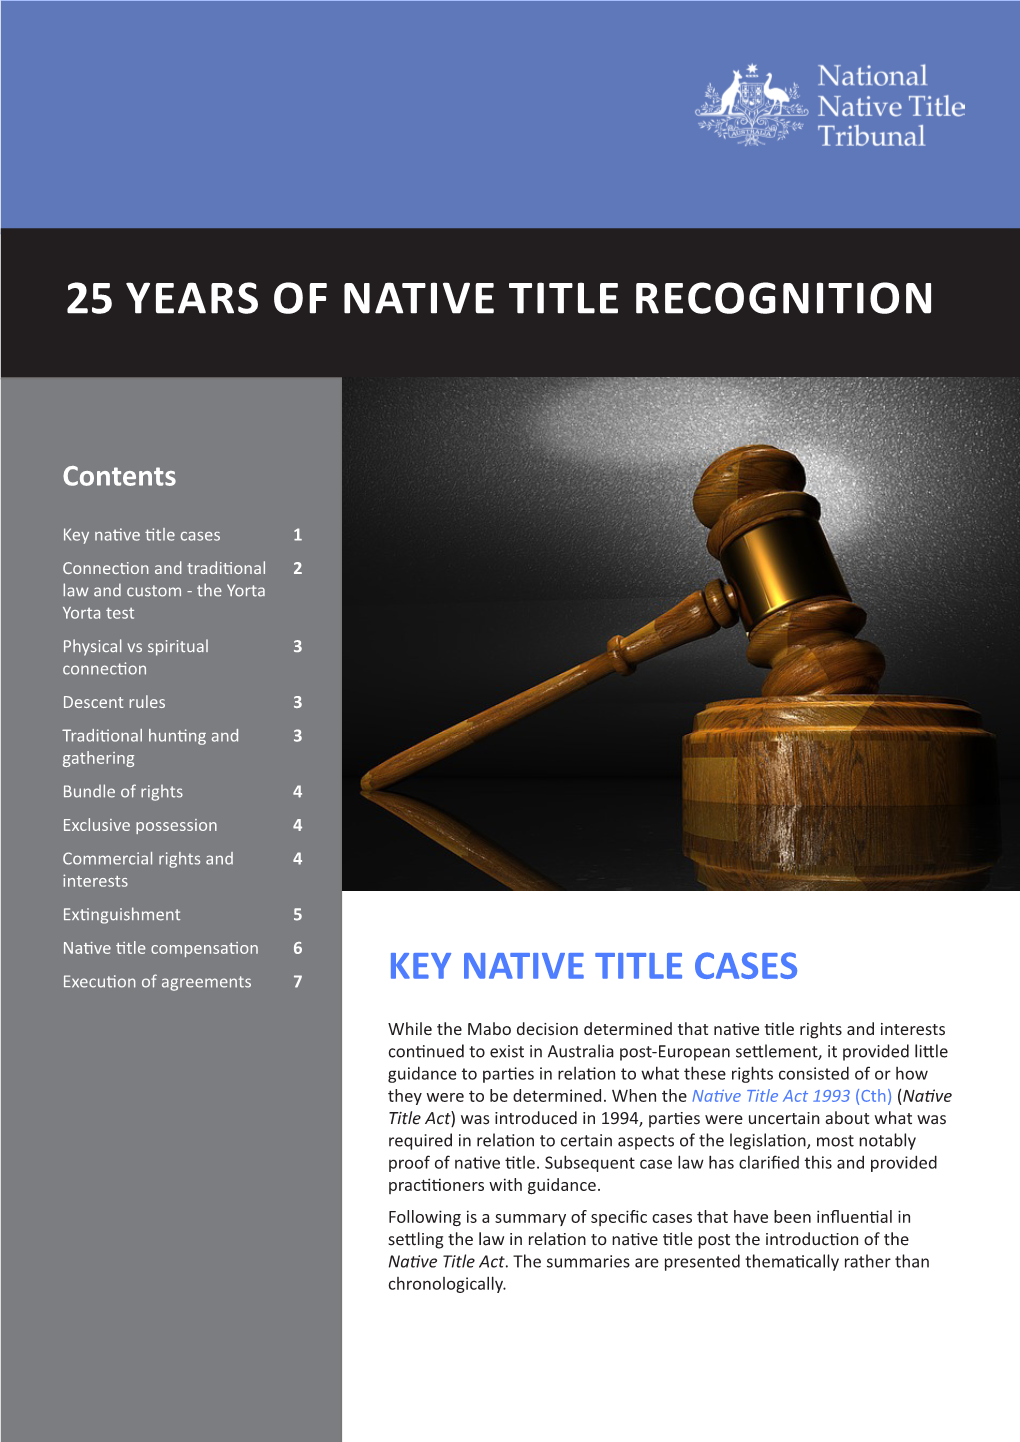 Key Native Title Cases